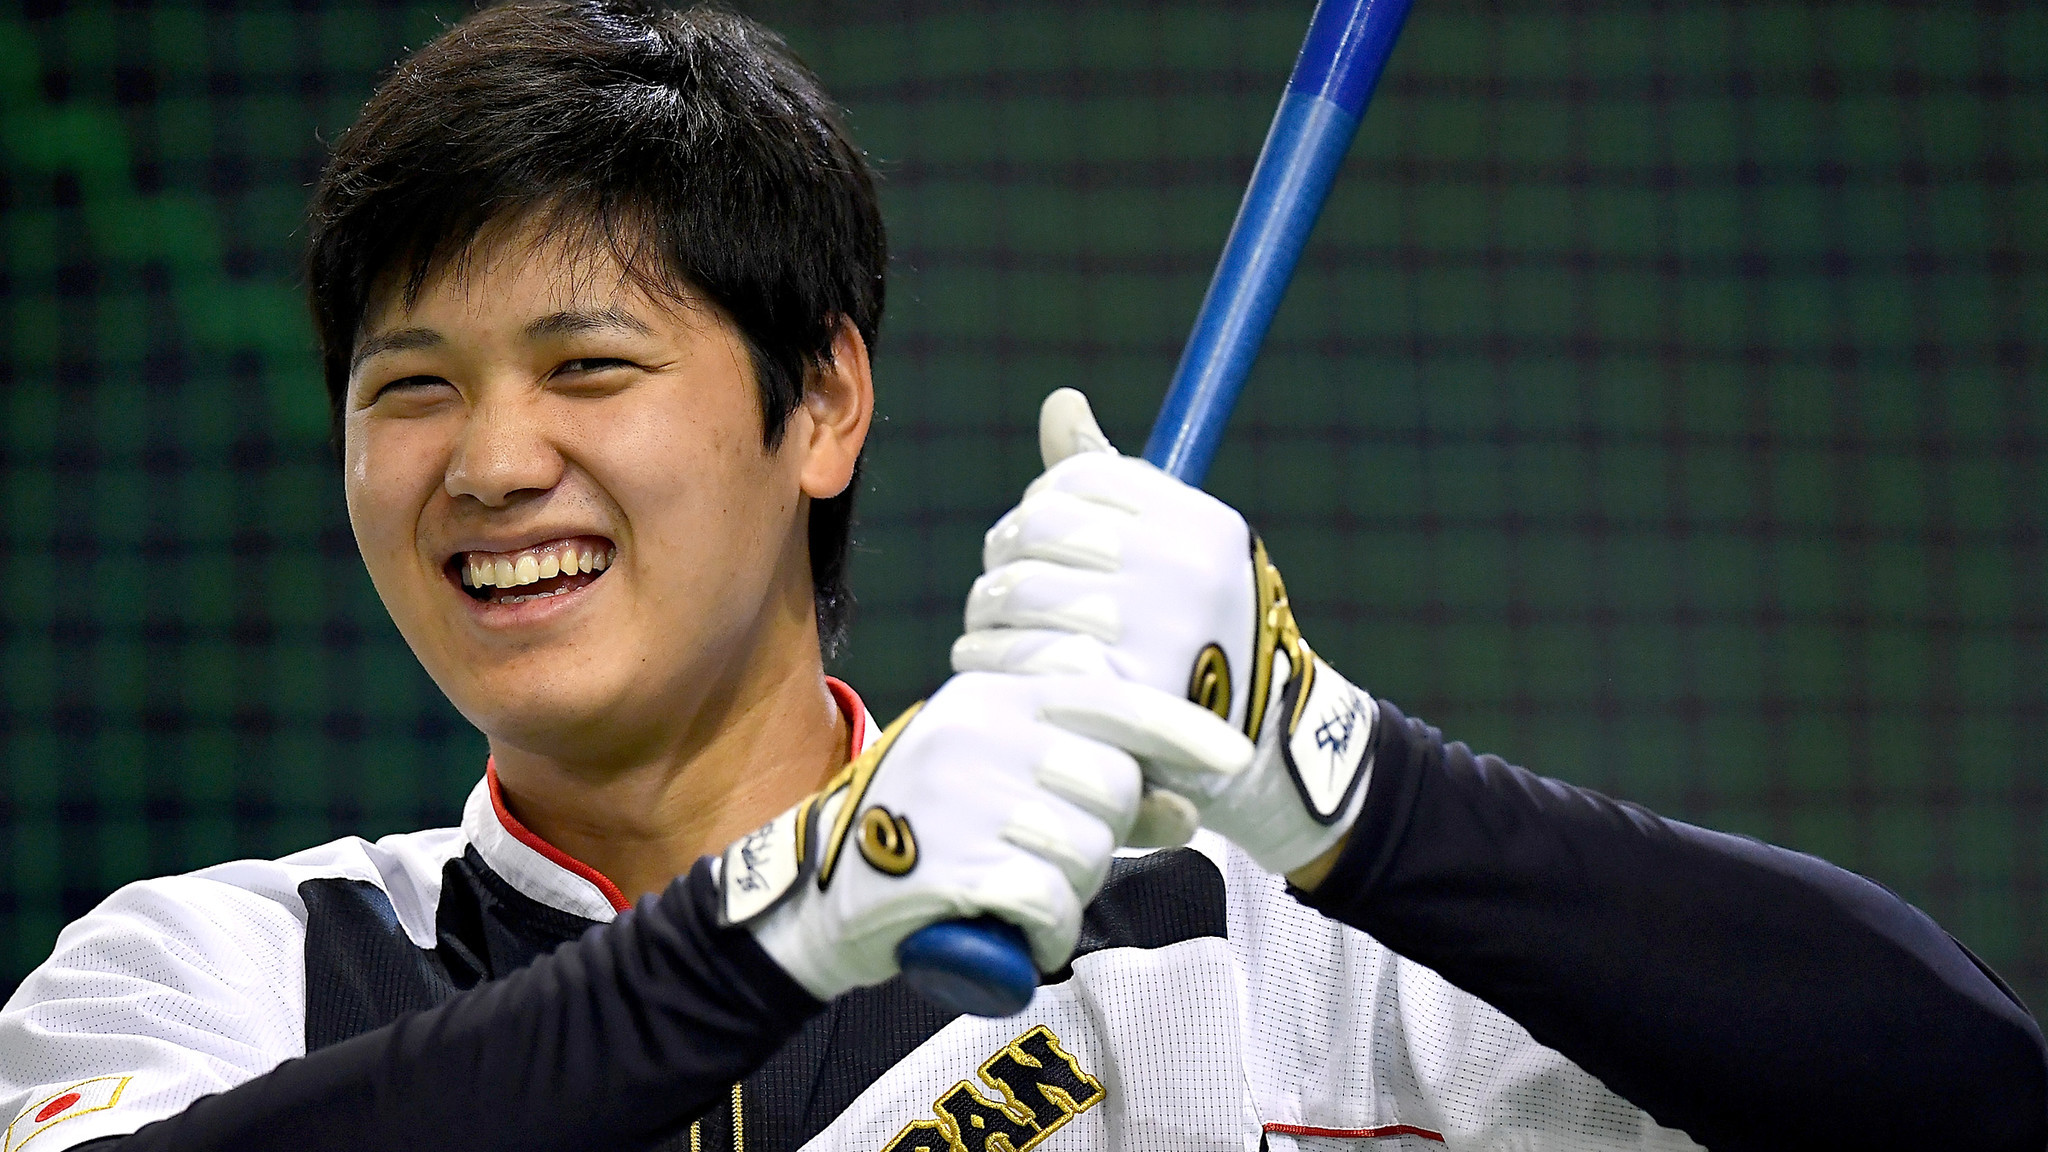 Shohei Ohtani warms up ahead of an international friendly game between Japan and the Netherlands at the Tokyo Dome on Nov. 12, 2016.